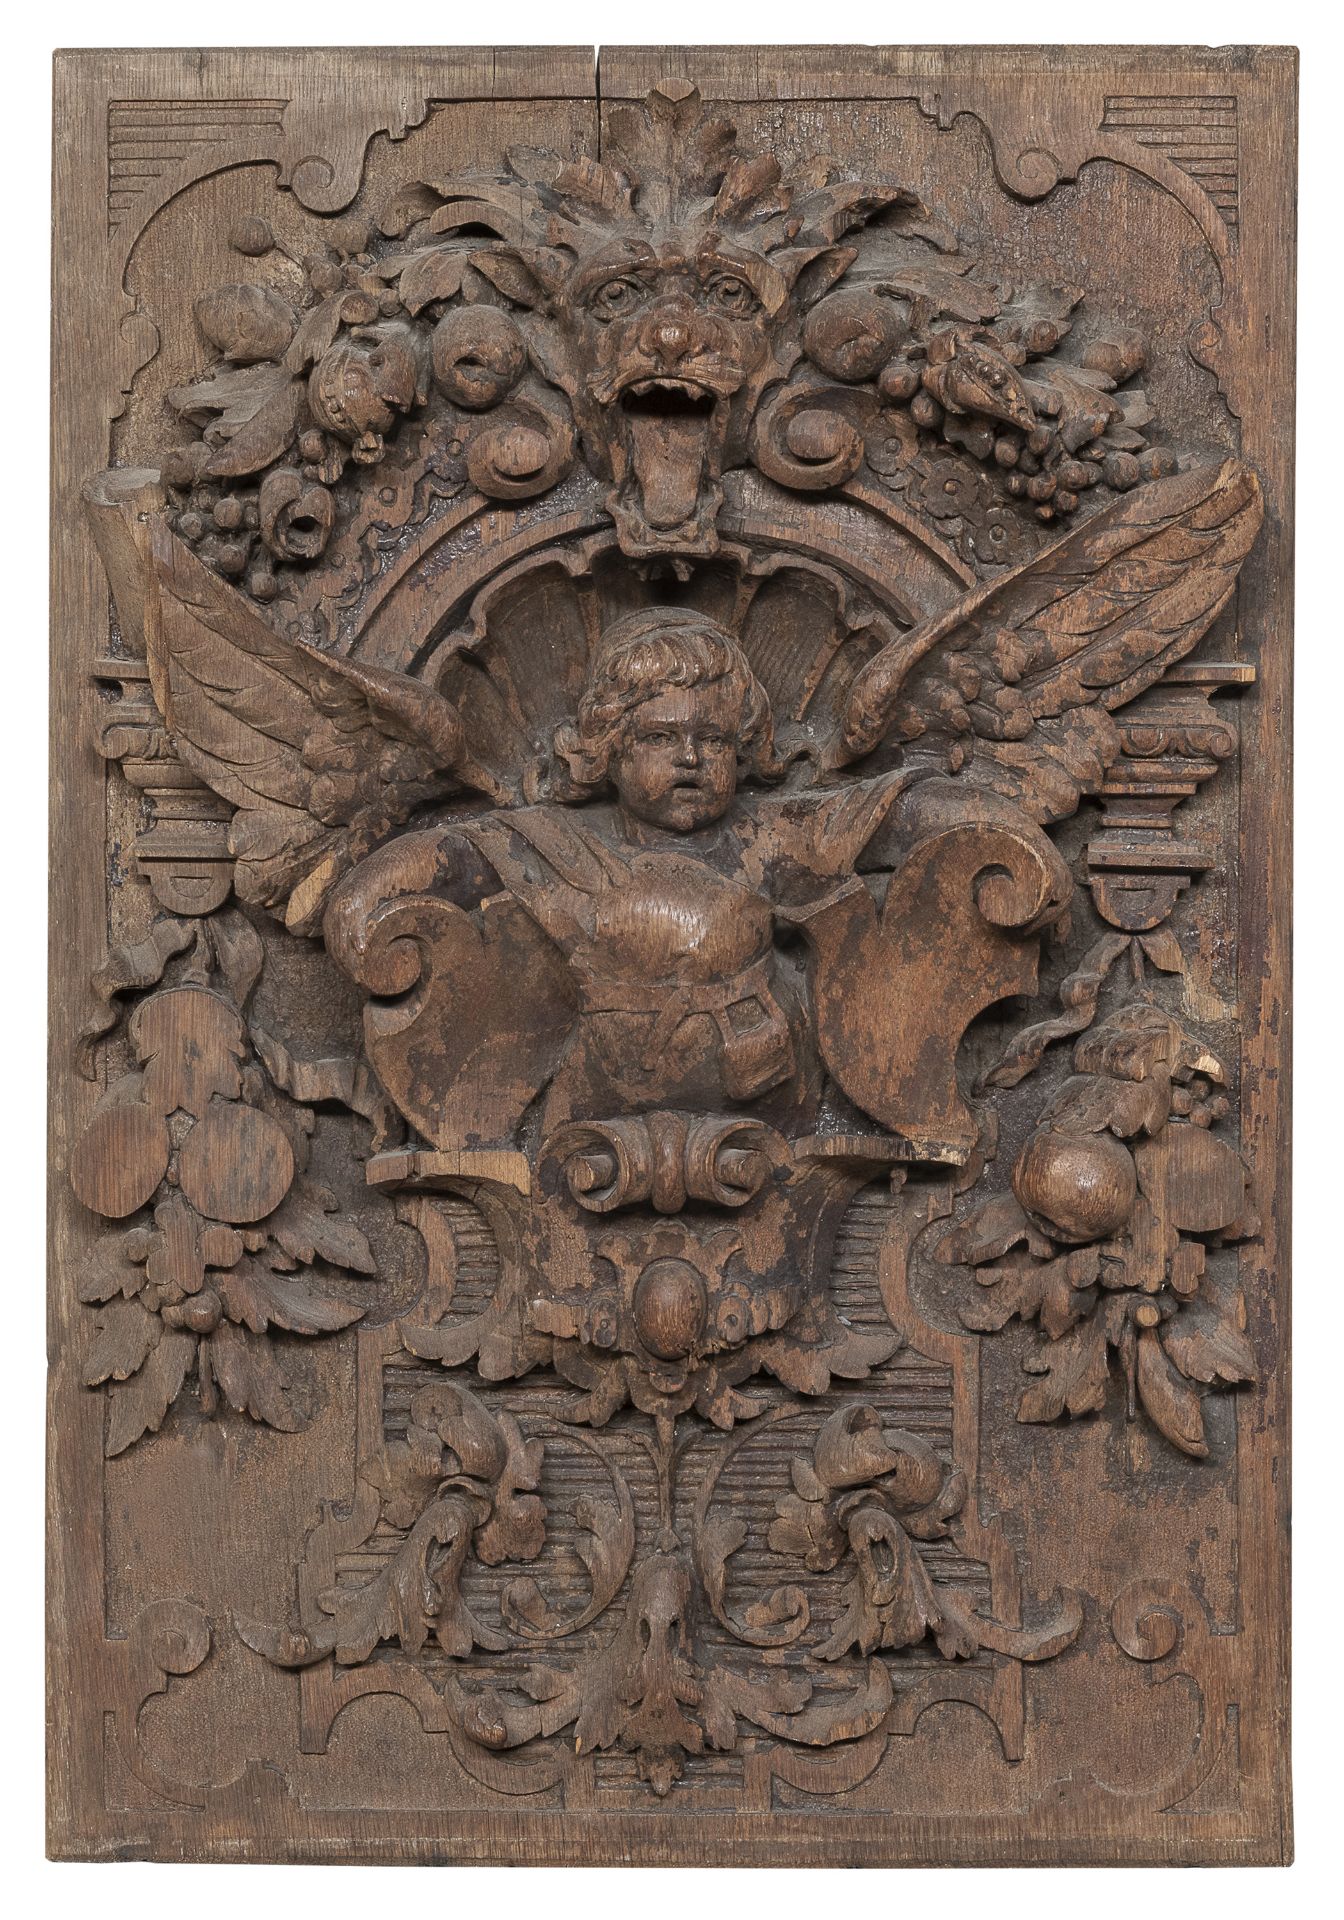 HIGH RELIEF IN OAK END OF THE 18TH CENTURY